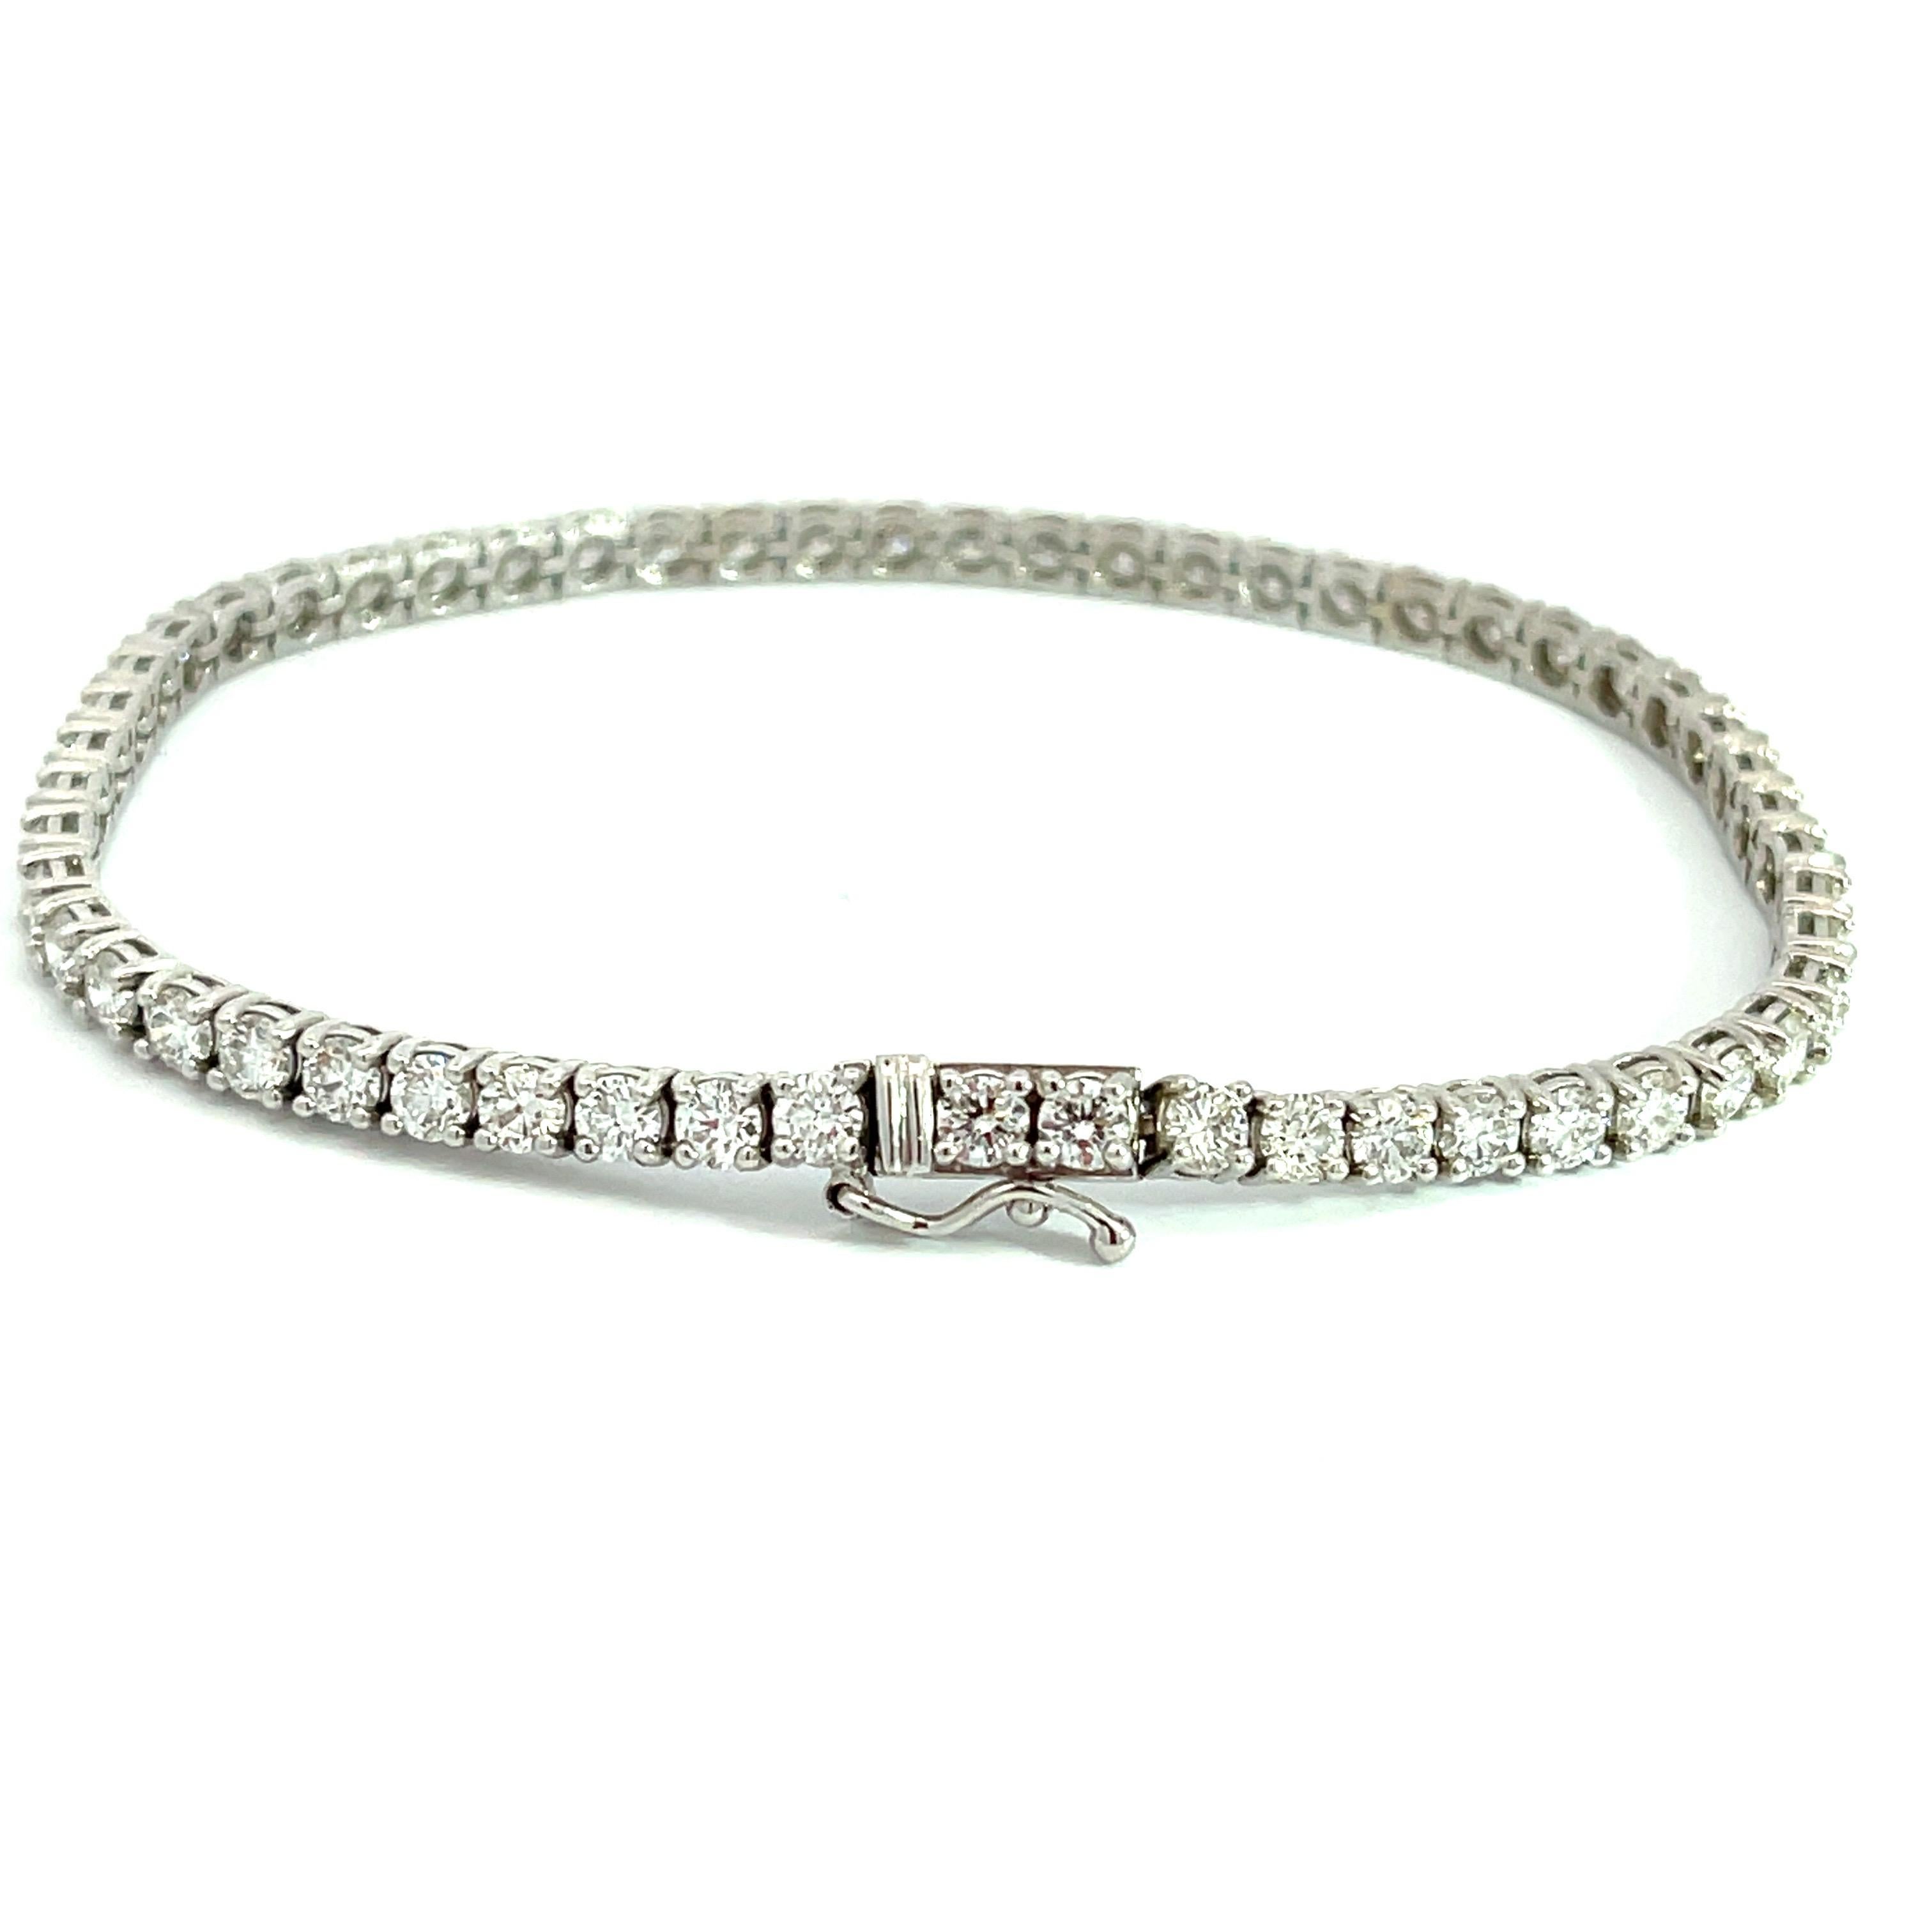 Introducing the exquisite 14k White Gold 1.75ctw Diamond Tennis Bracelet, a true symbol of timeless elegance and sophistication. This dazzling masterpiece is a must-have for those seeking to make a stunning statement. Crafted with meticulous